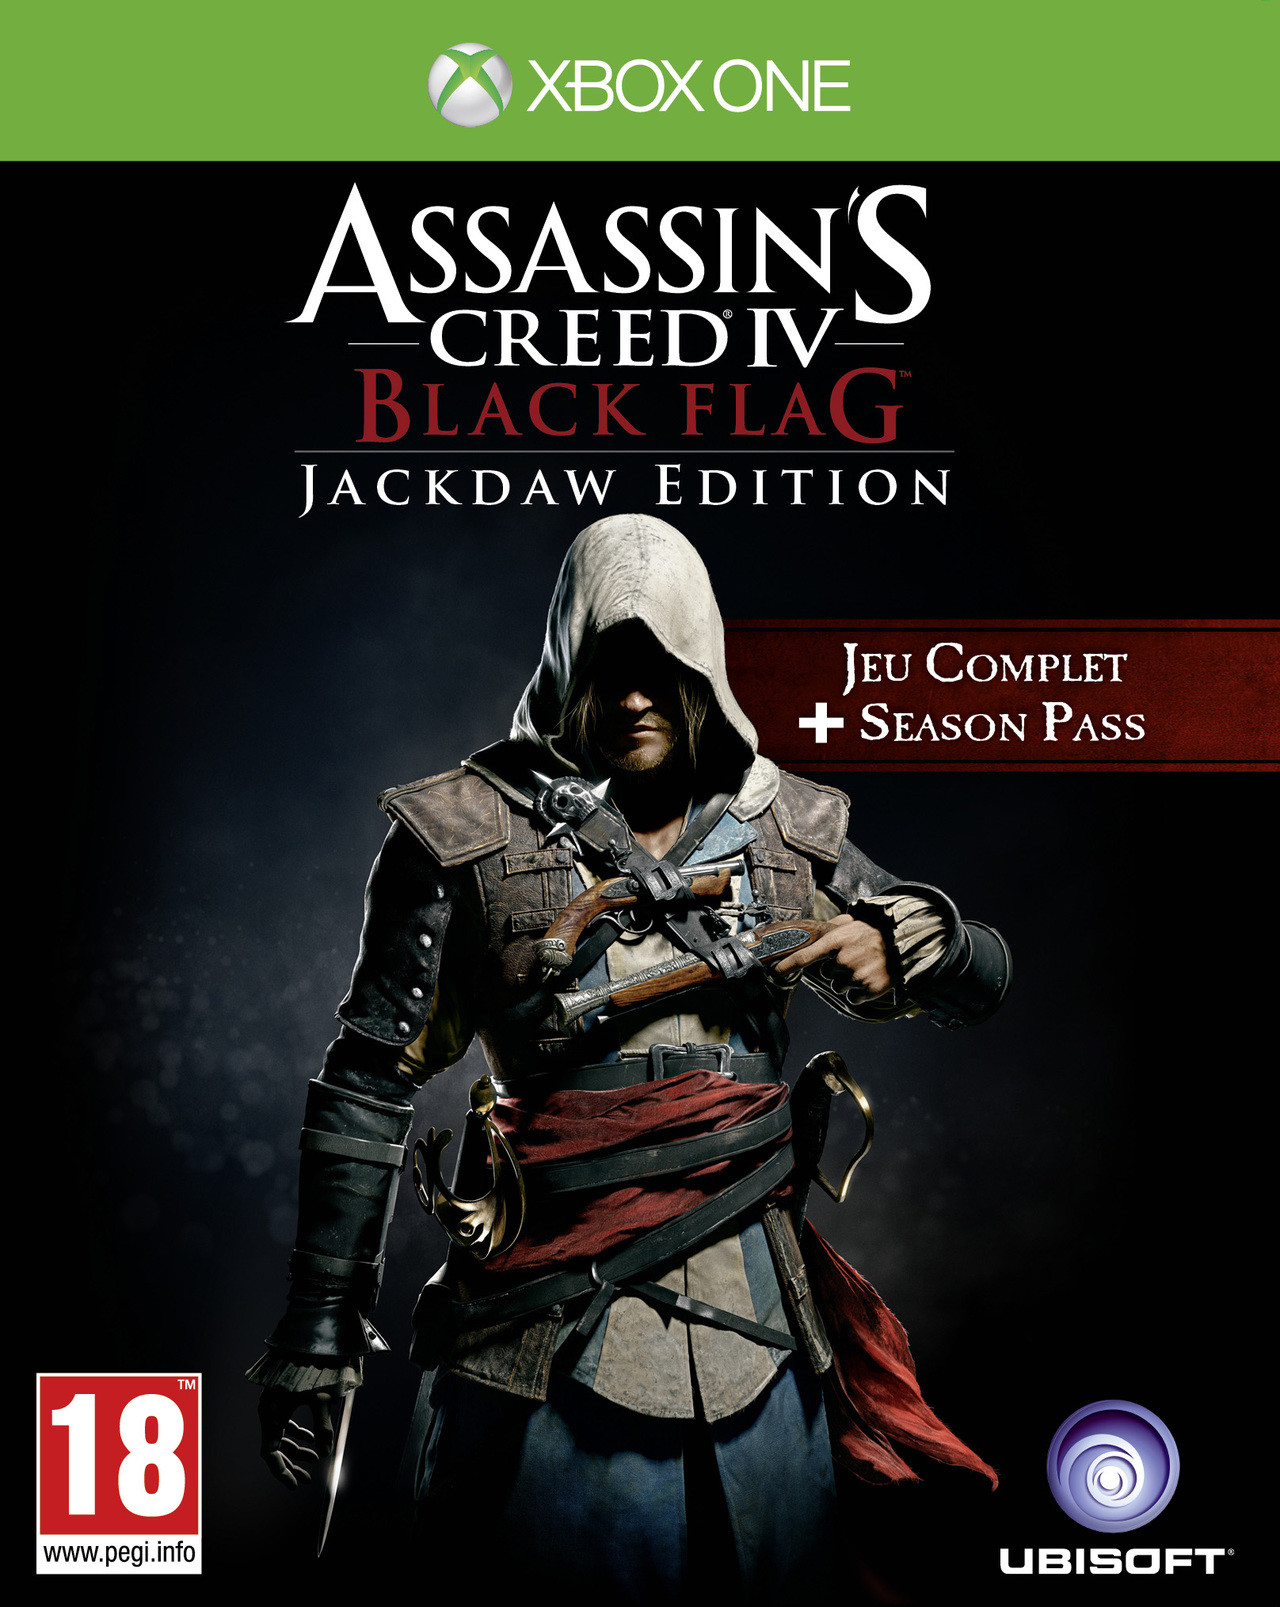 jaquette-assassin-s-creed-iv-black-flag-jackdaw-edition-xbox-one-cover-avant-g-1394472418